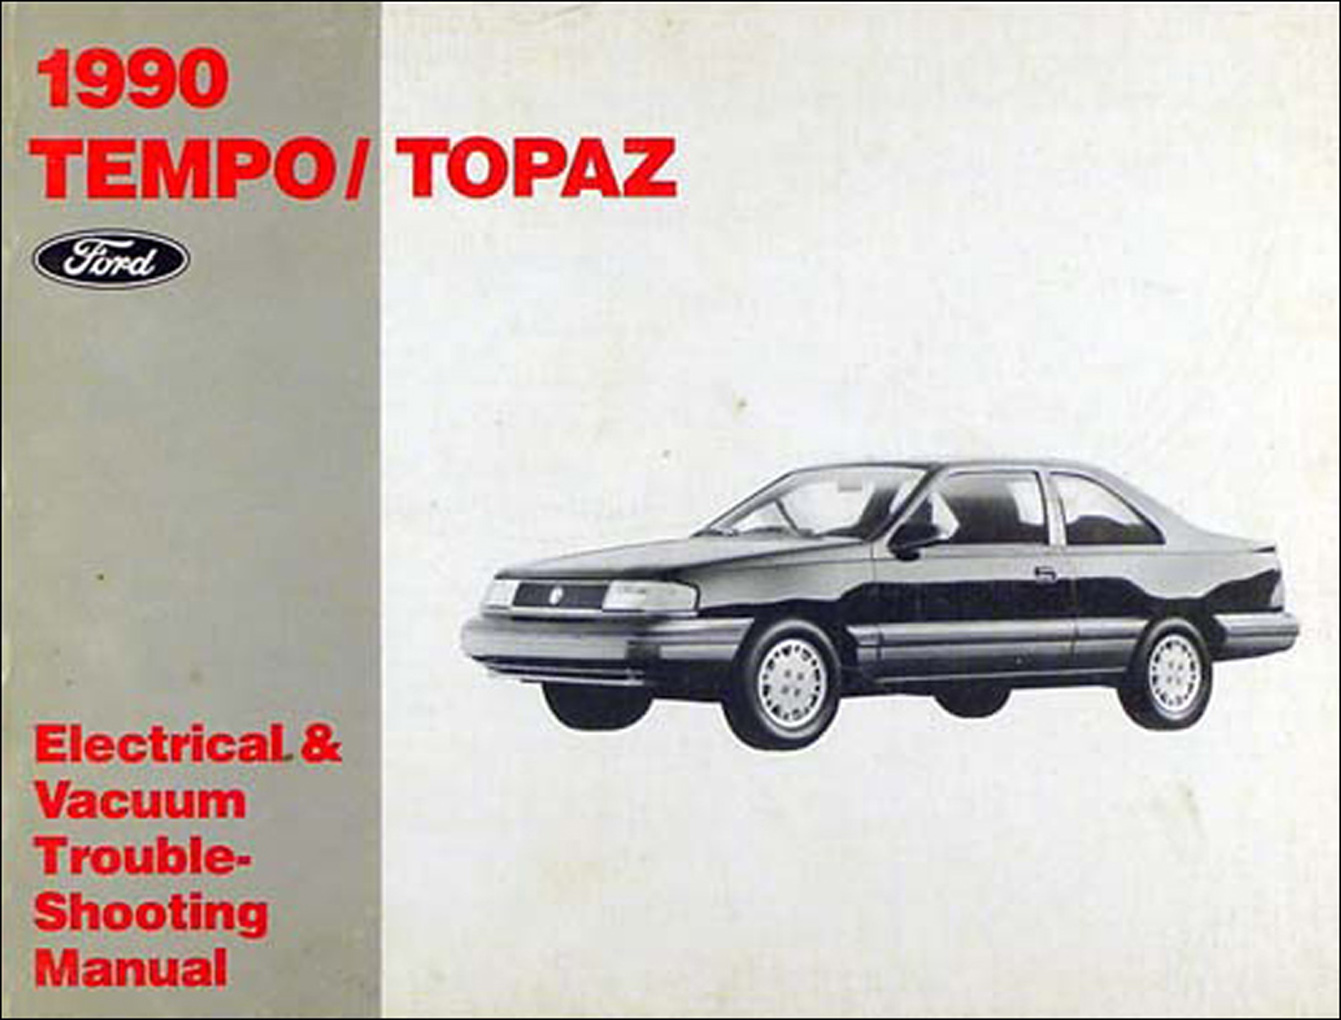 1990 Ford Tempo Mercury Topaz Electrical Vacuum Troubleshooting Manual